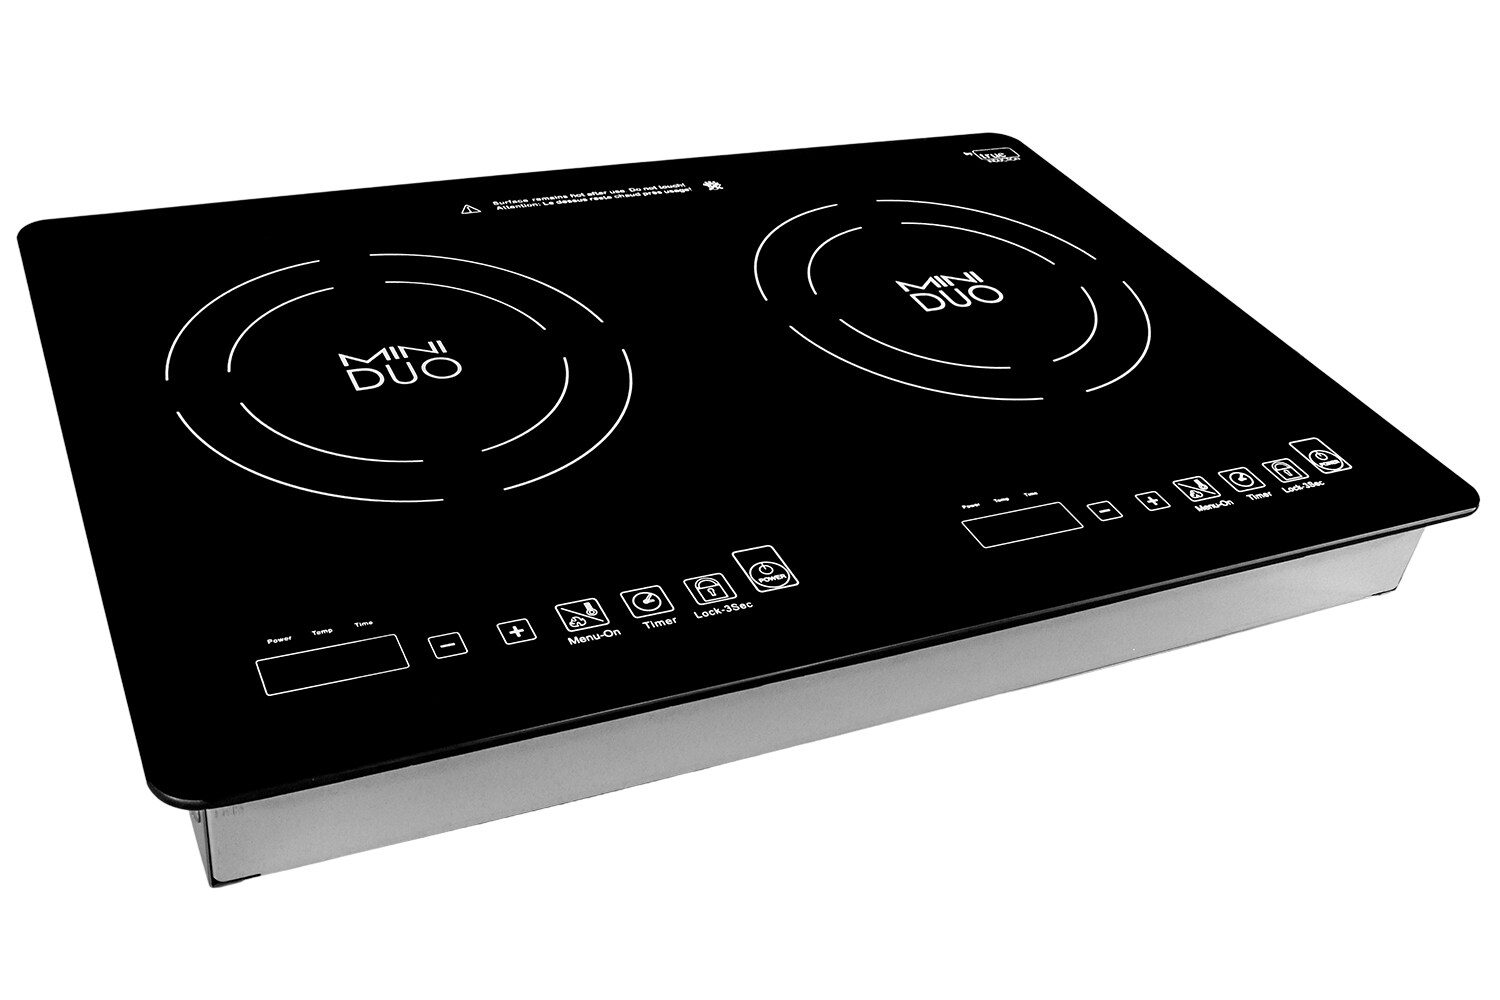 Portable Electric 2 Burner Induction Cooktop Stove — Rickle.